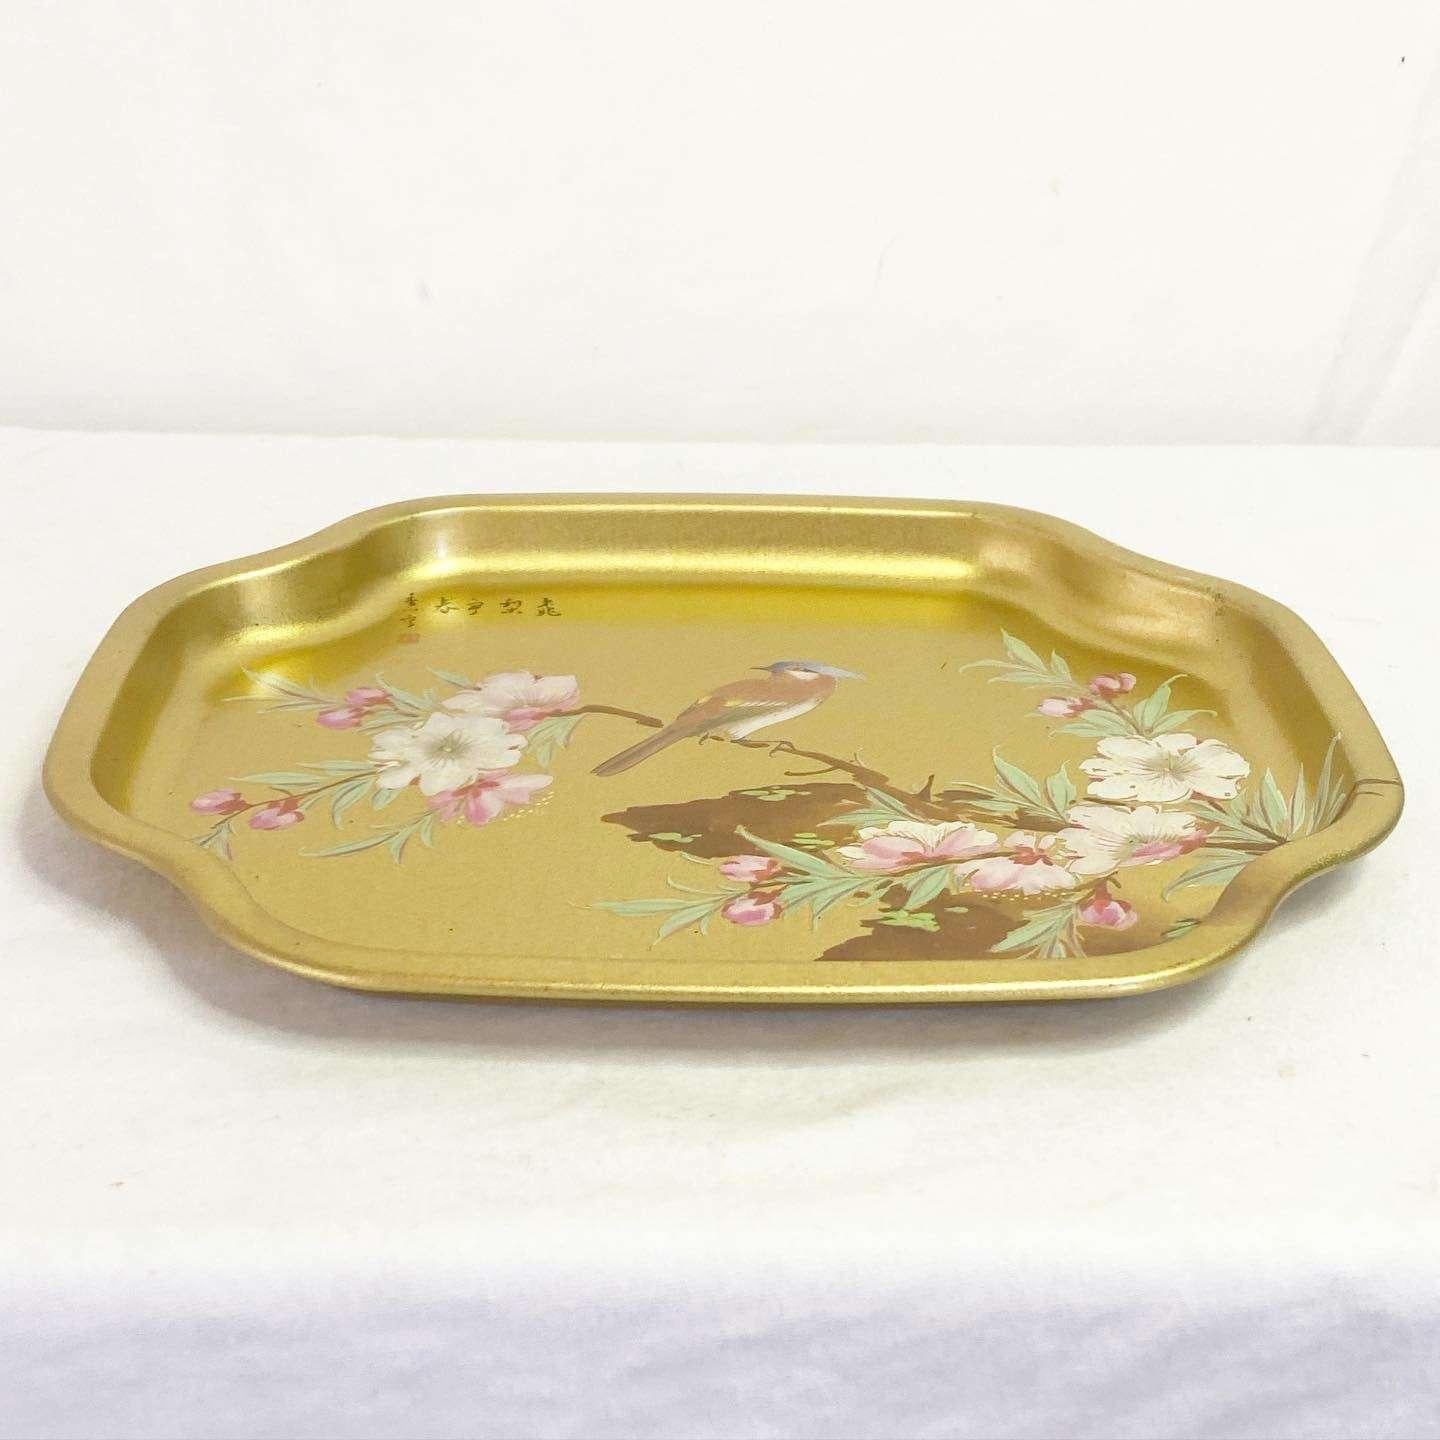 Vintage Chinoiserie Elite Gold Aviary and Blossoms Trays - 8 Pieces For Sale 3